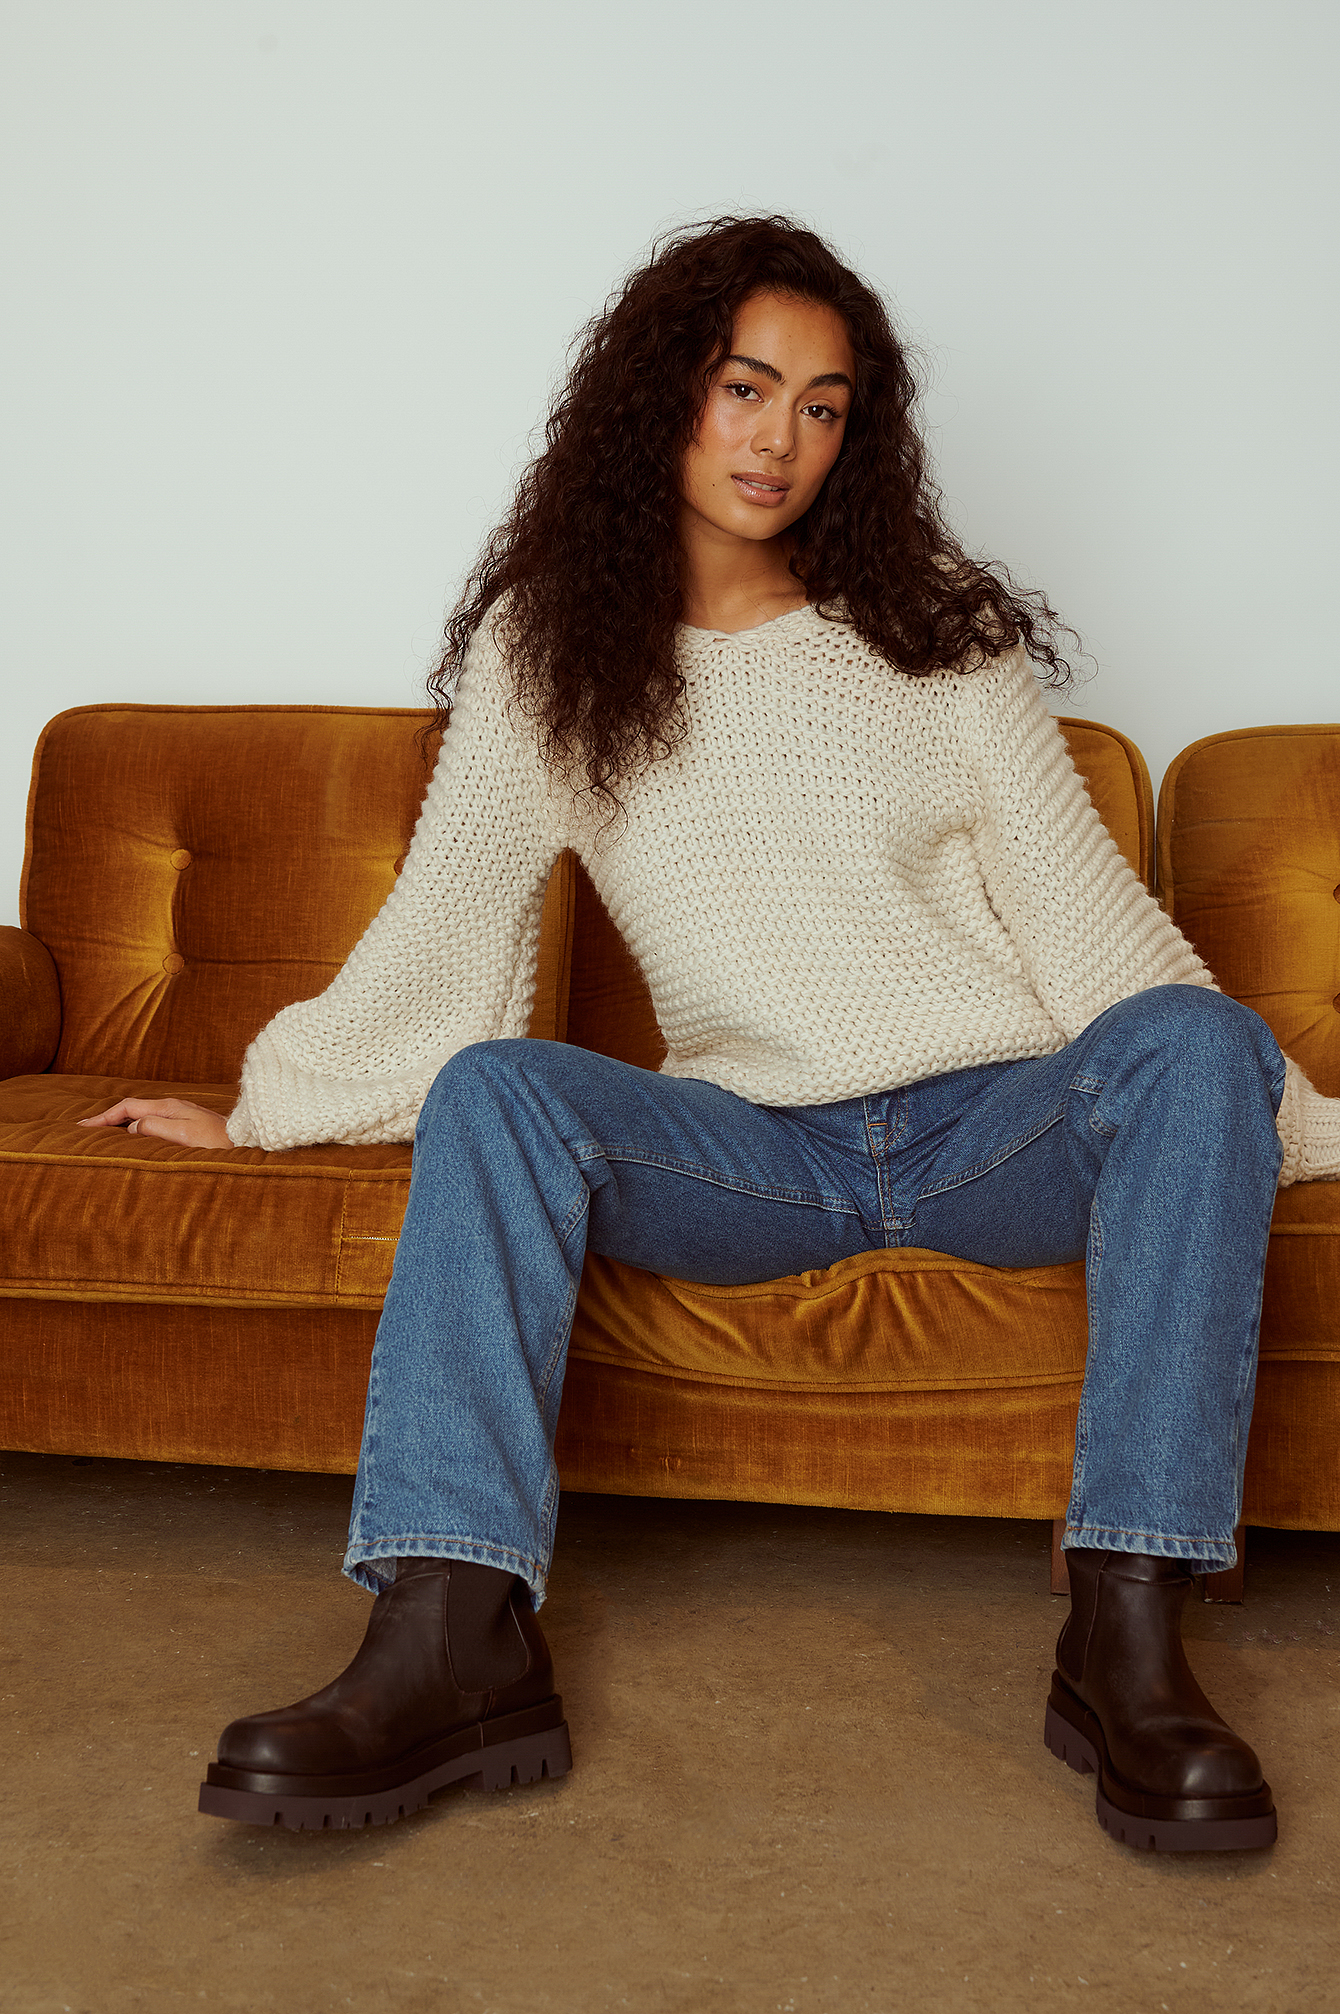 Wide Neckdrop Knitted Sweater Outfit